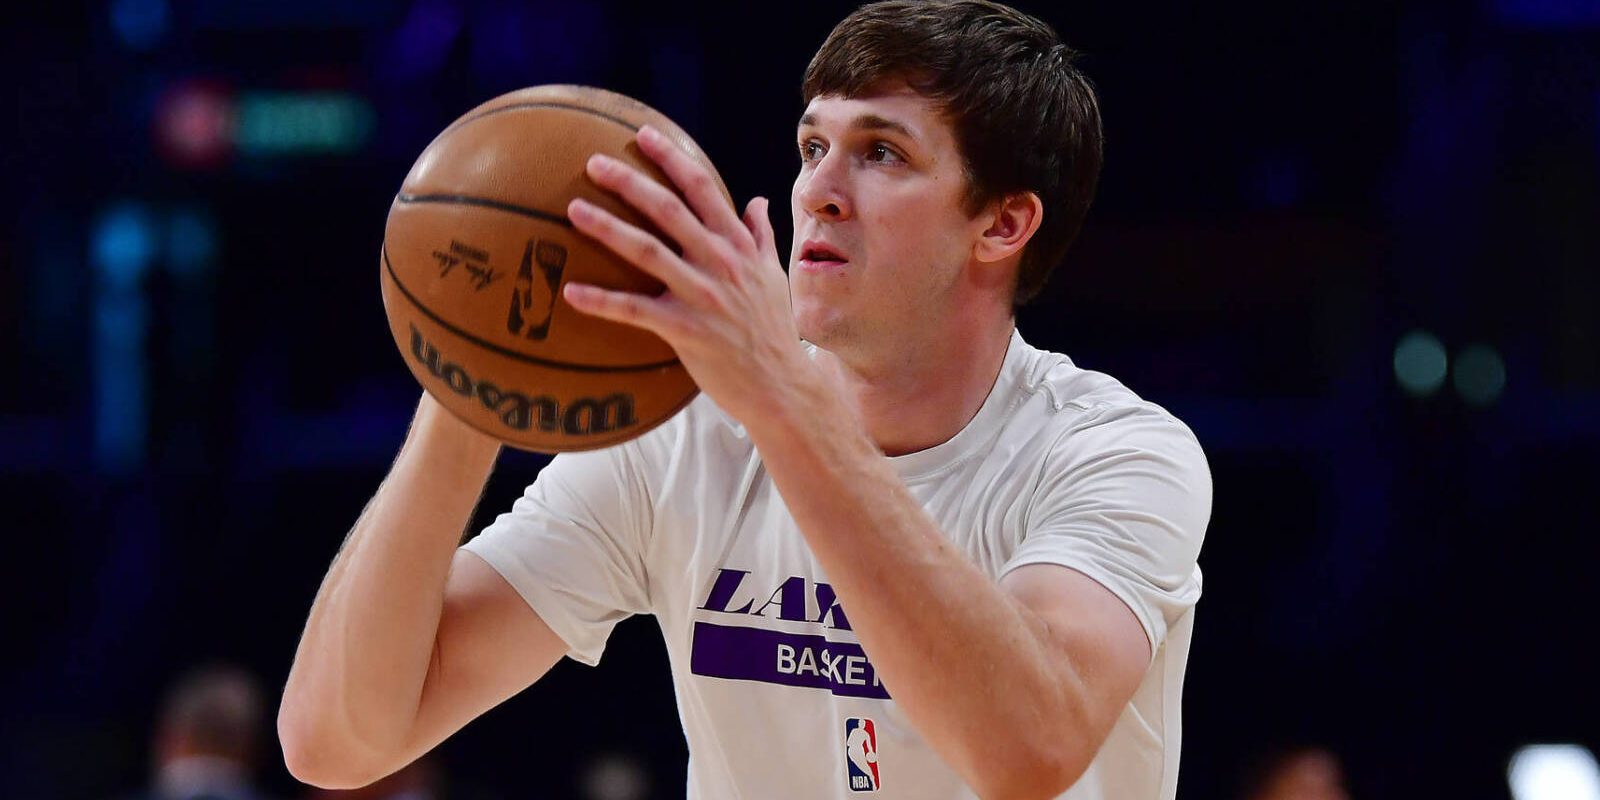 May 22, 2023; Los Angeles, California, USA; Los Angeles Lakers guard Austin Reaves (15) practices before playing against the Denver Nuggets in game four of the Western Conference Finals for the 2023 NBA playoffs at Crypto.com Arena. Mandatory Credit: Gary A. Vasquez-USA TODAY Sports